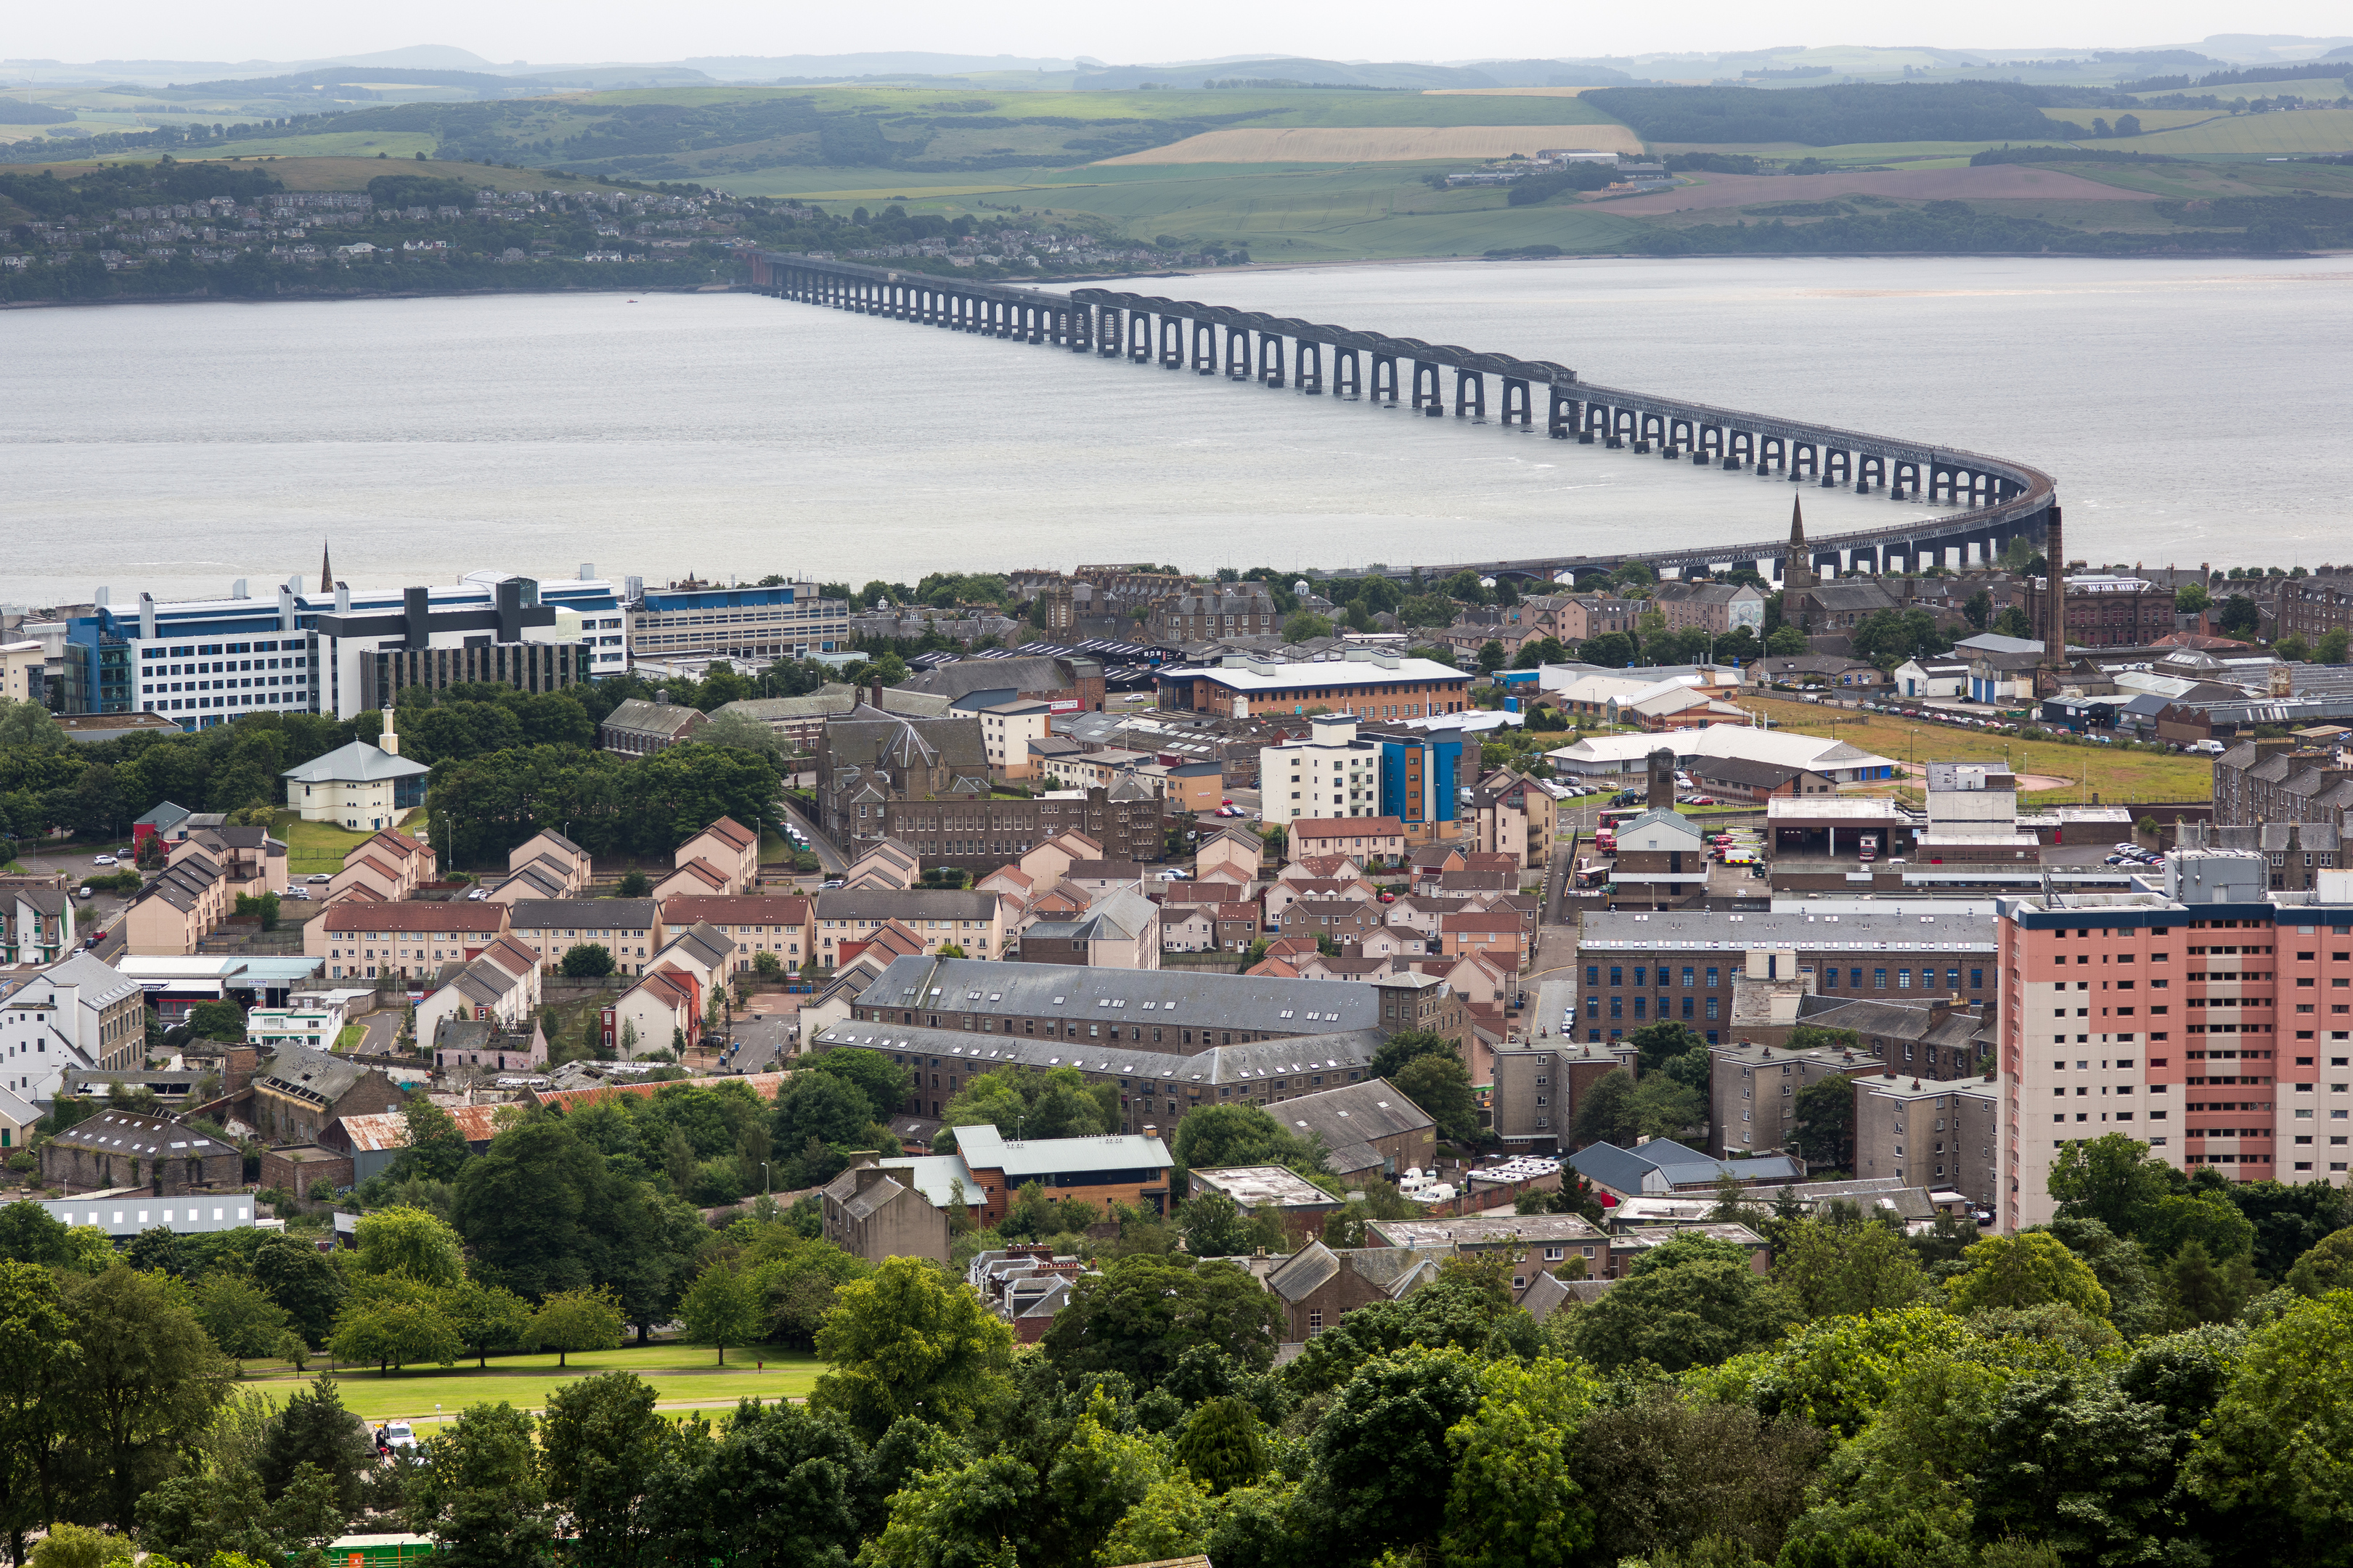 Dundee faces major economic challenges according to the Cities Outlook Report.